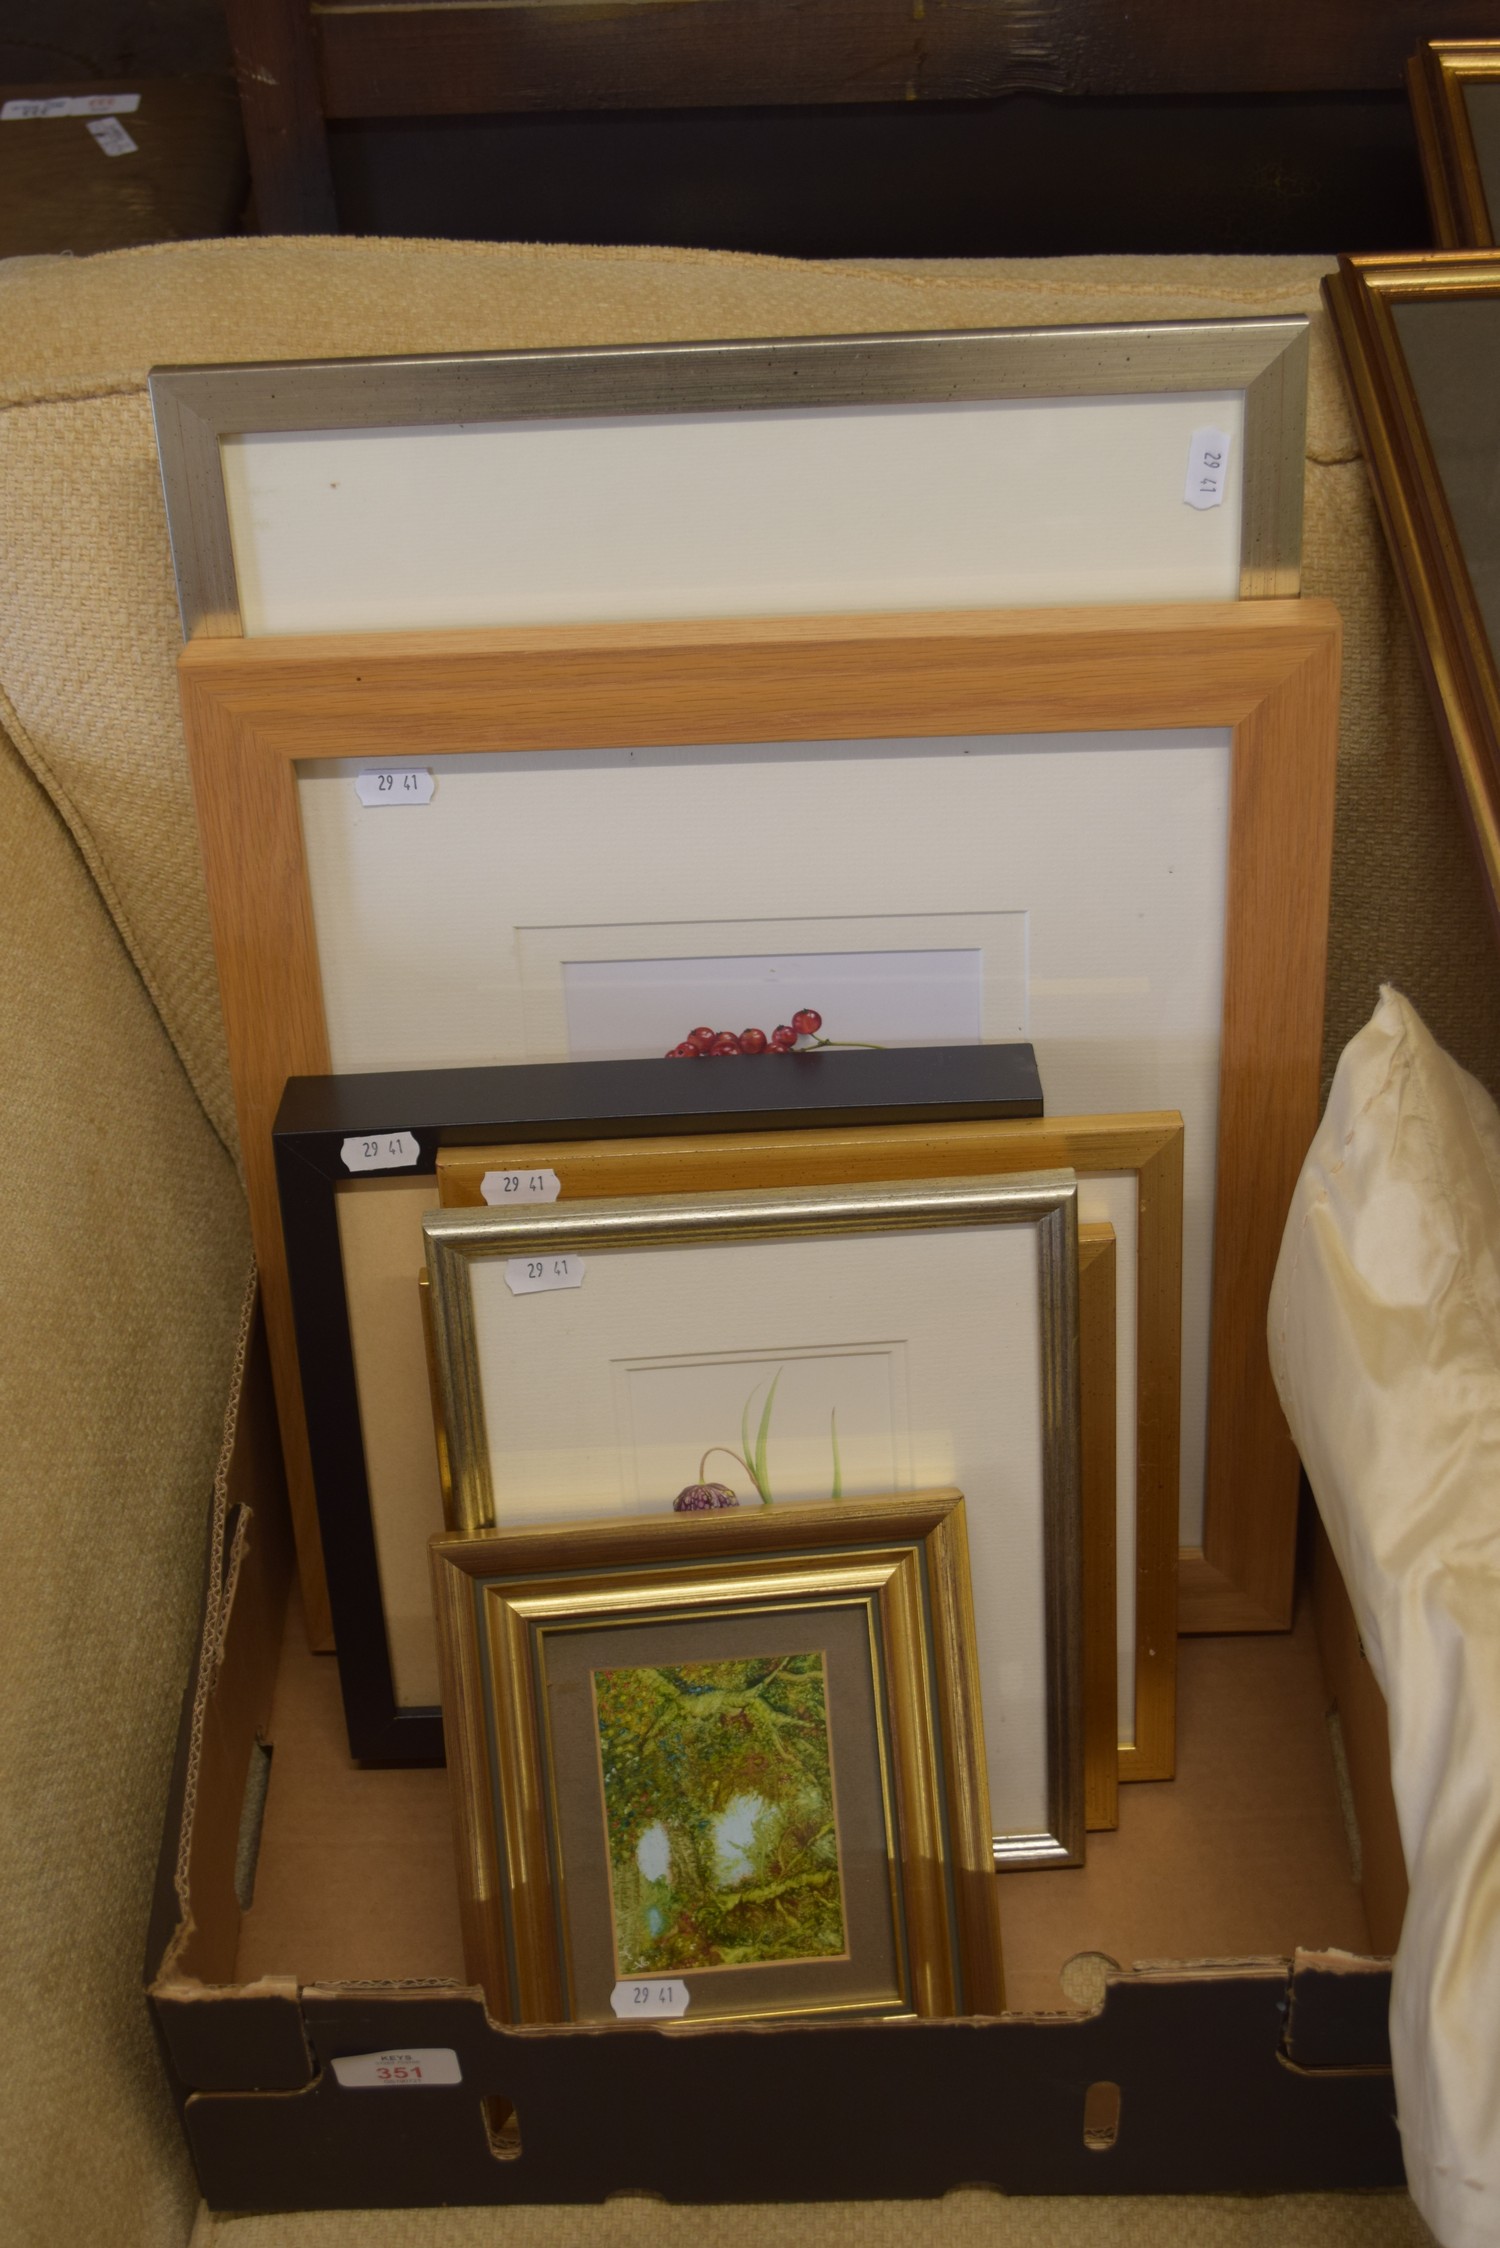 BOX OF VARIOUS SMALL FRAMED BOTANICAL WATERCOLOURS, MOSTLY APPEAR TO BE BY A SUSAN DALTON SBA,